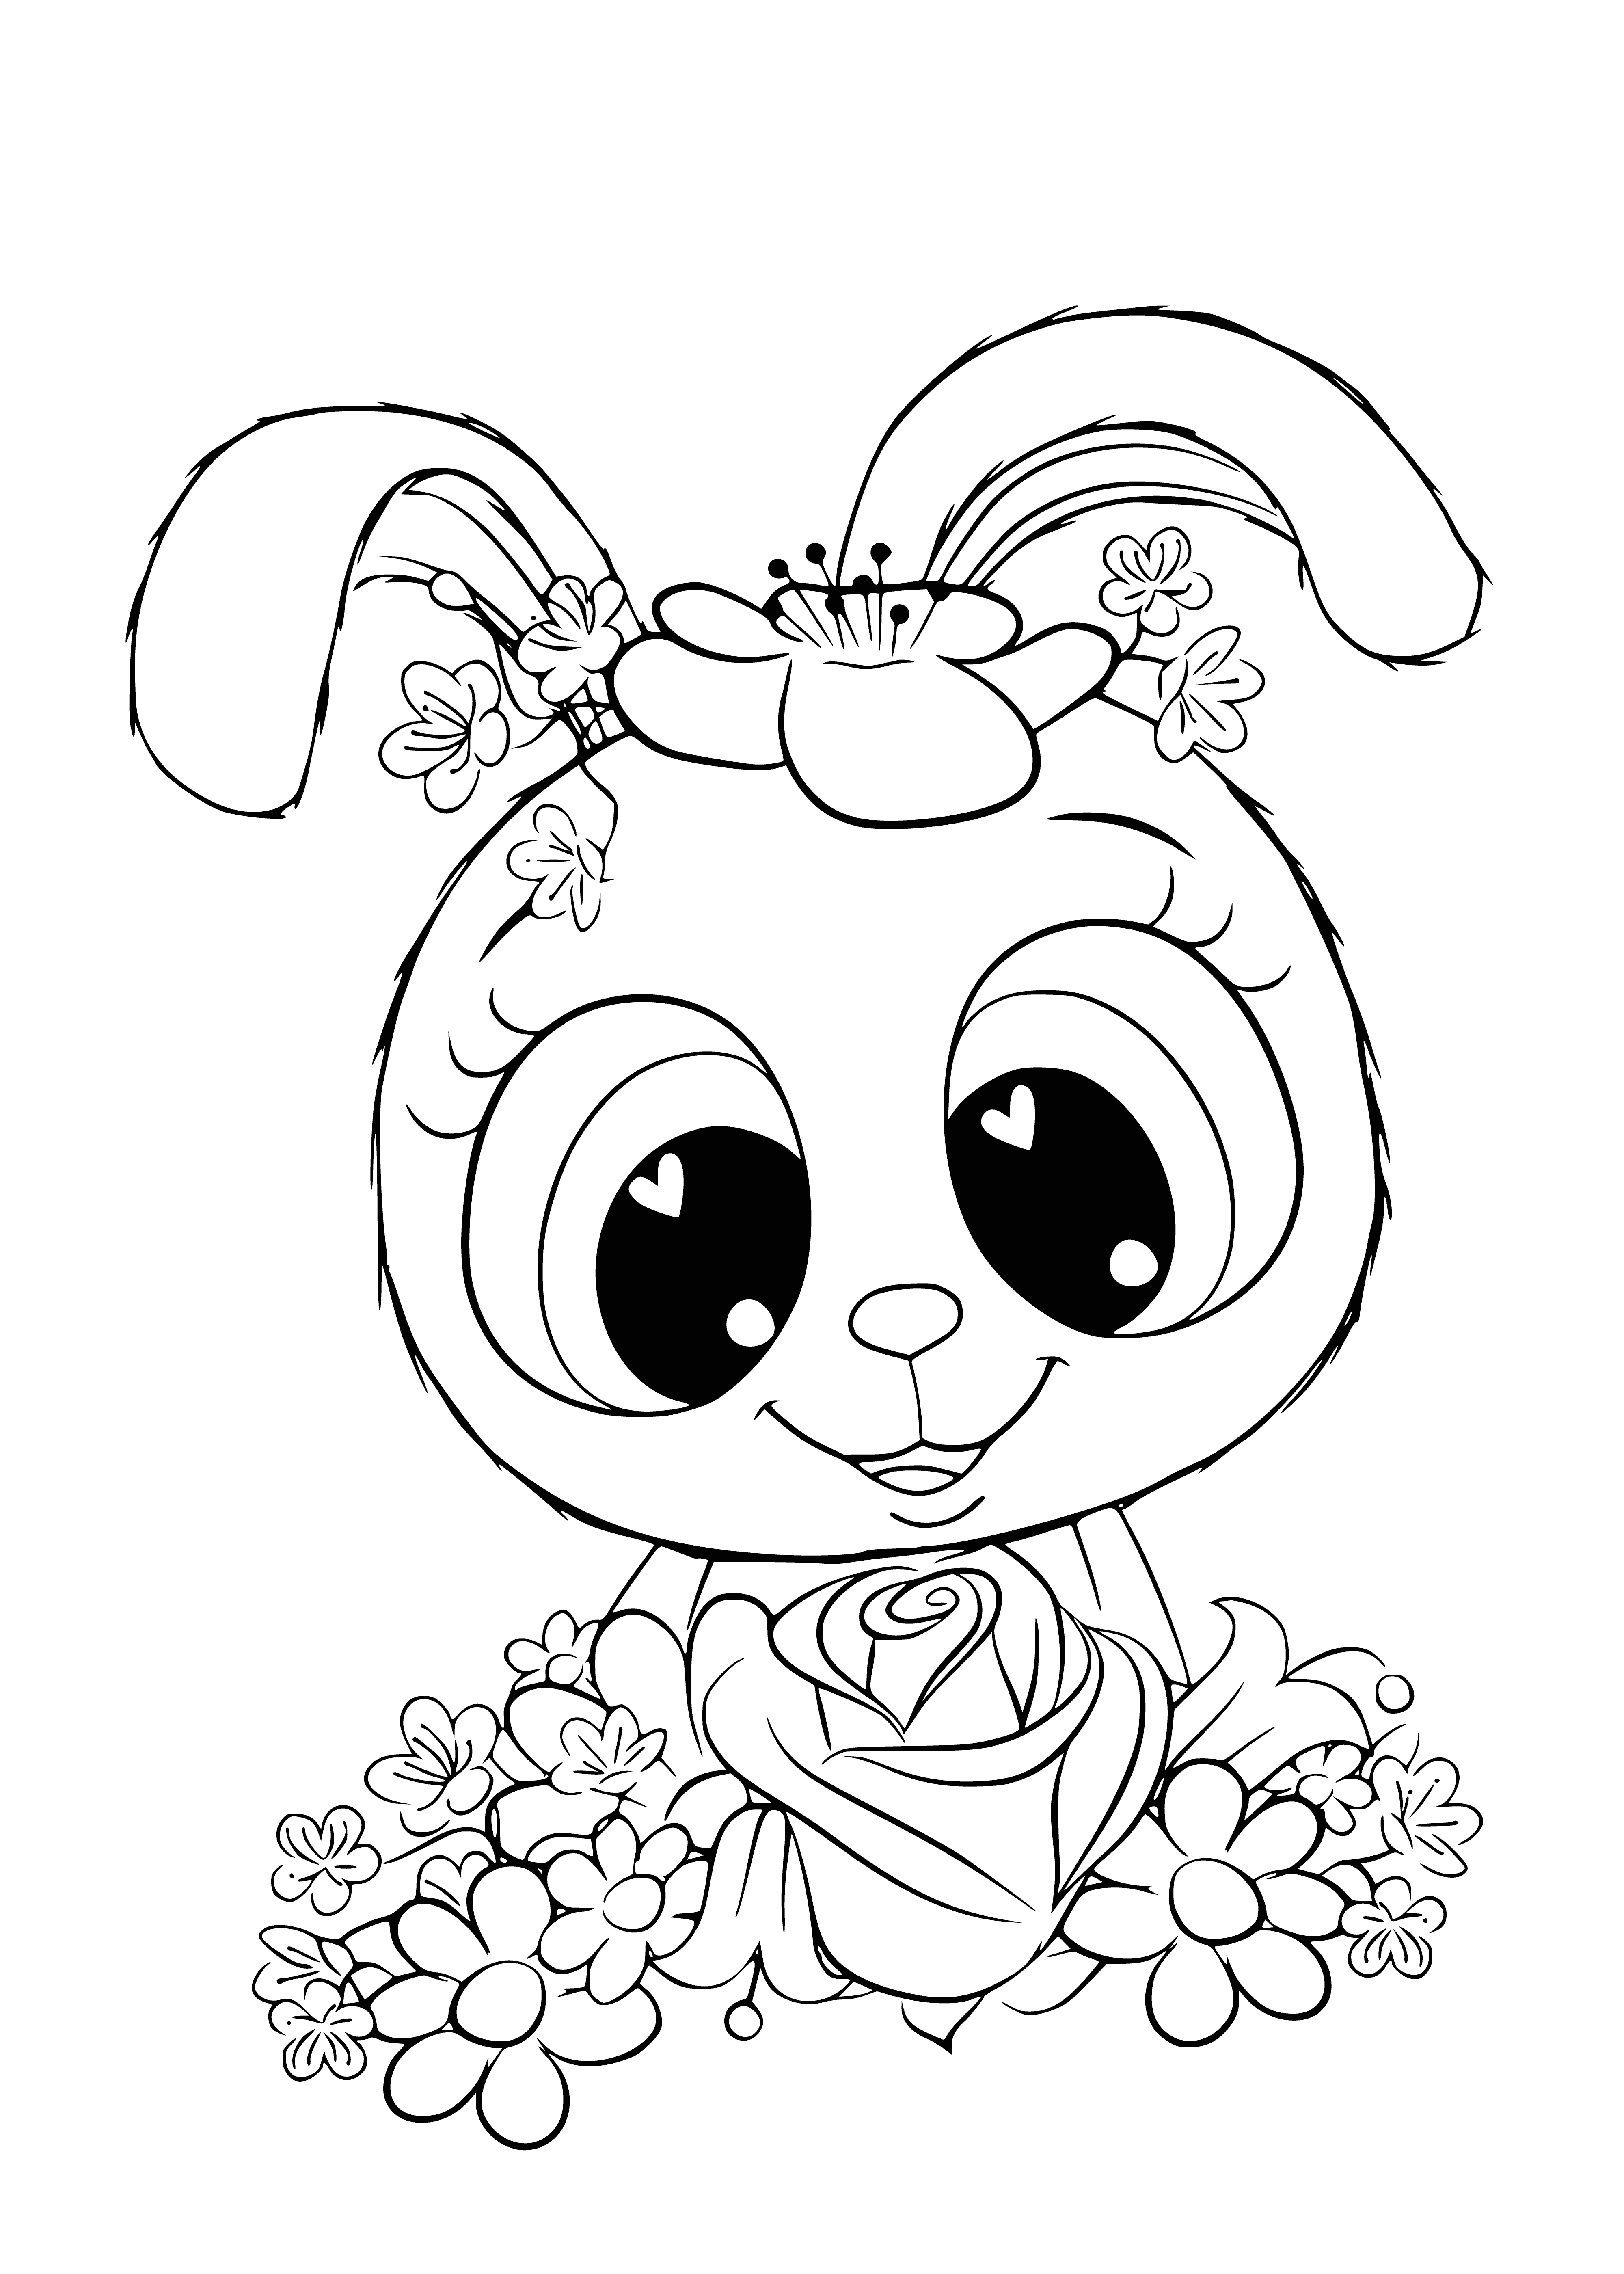 Bunny coloring page